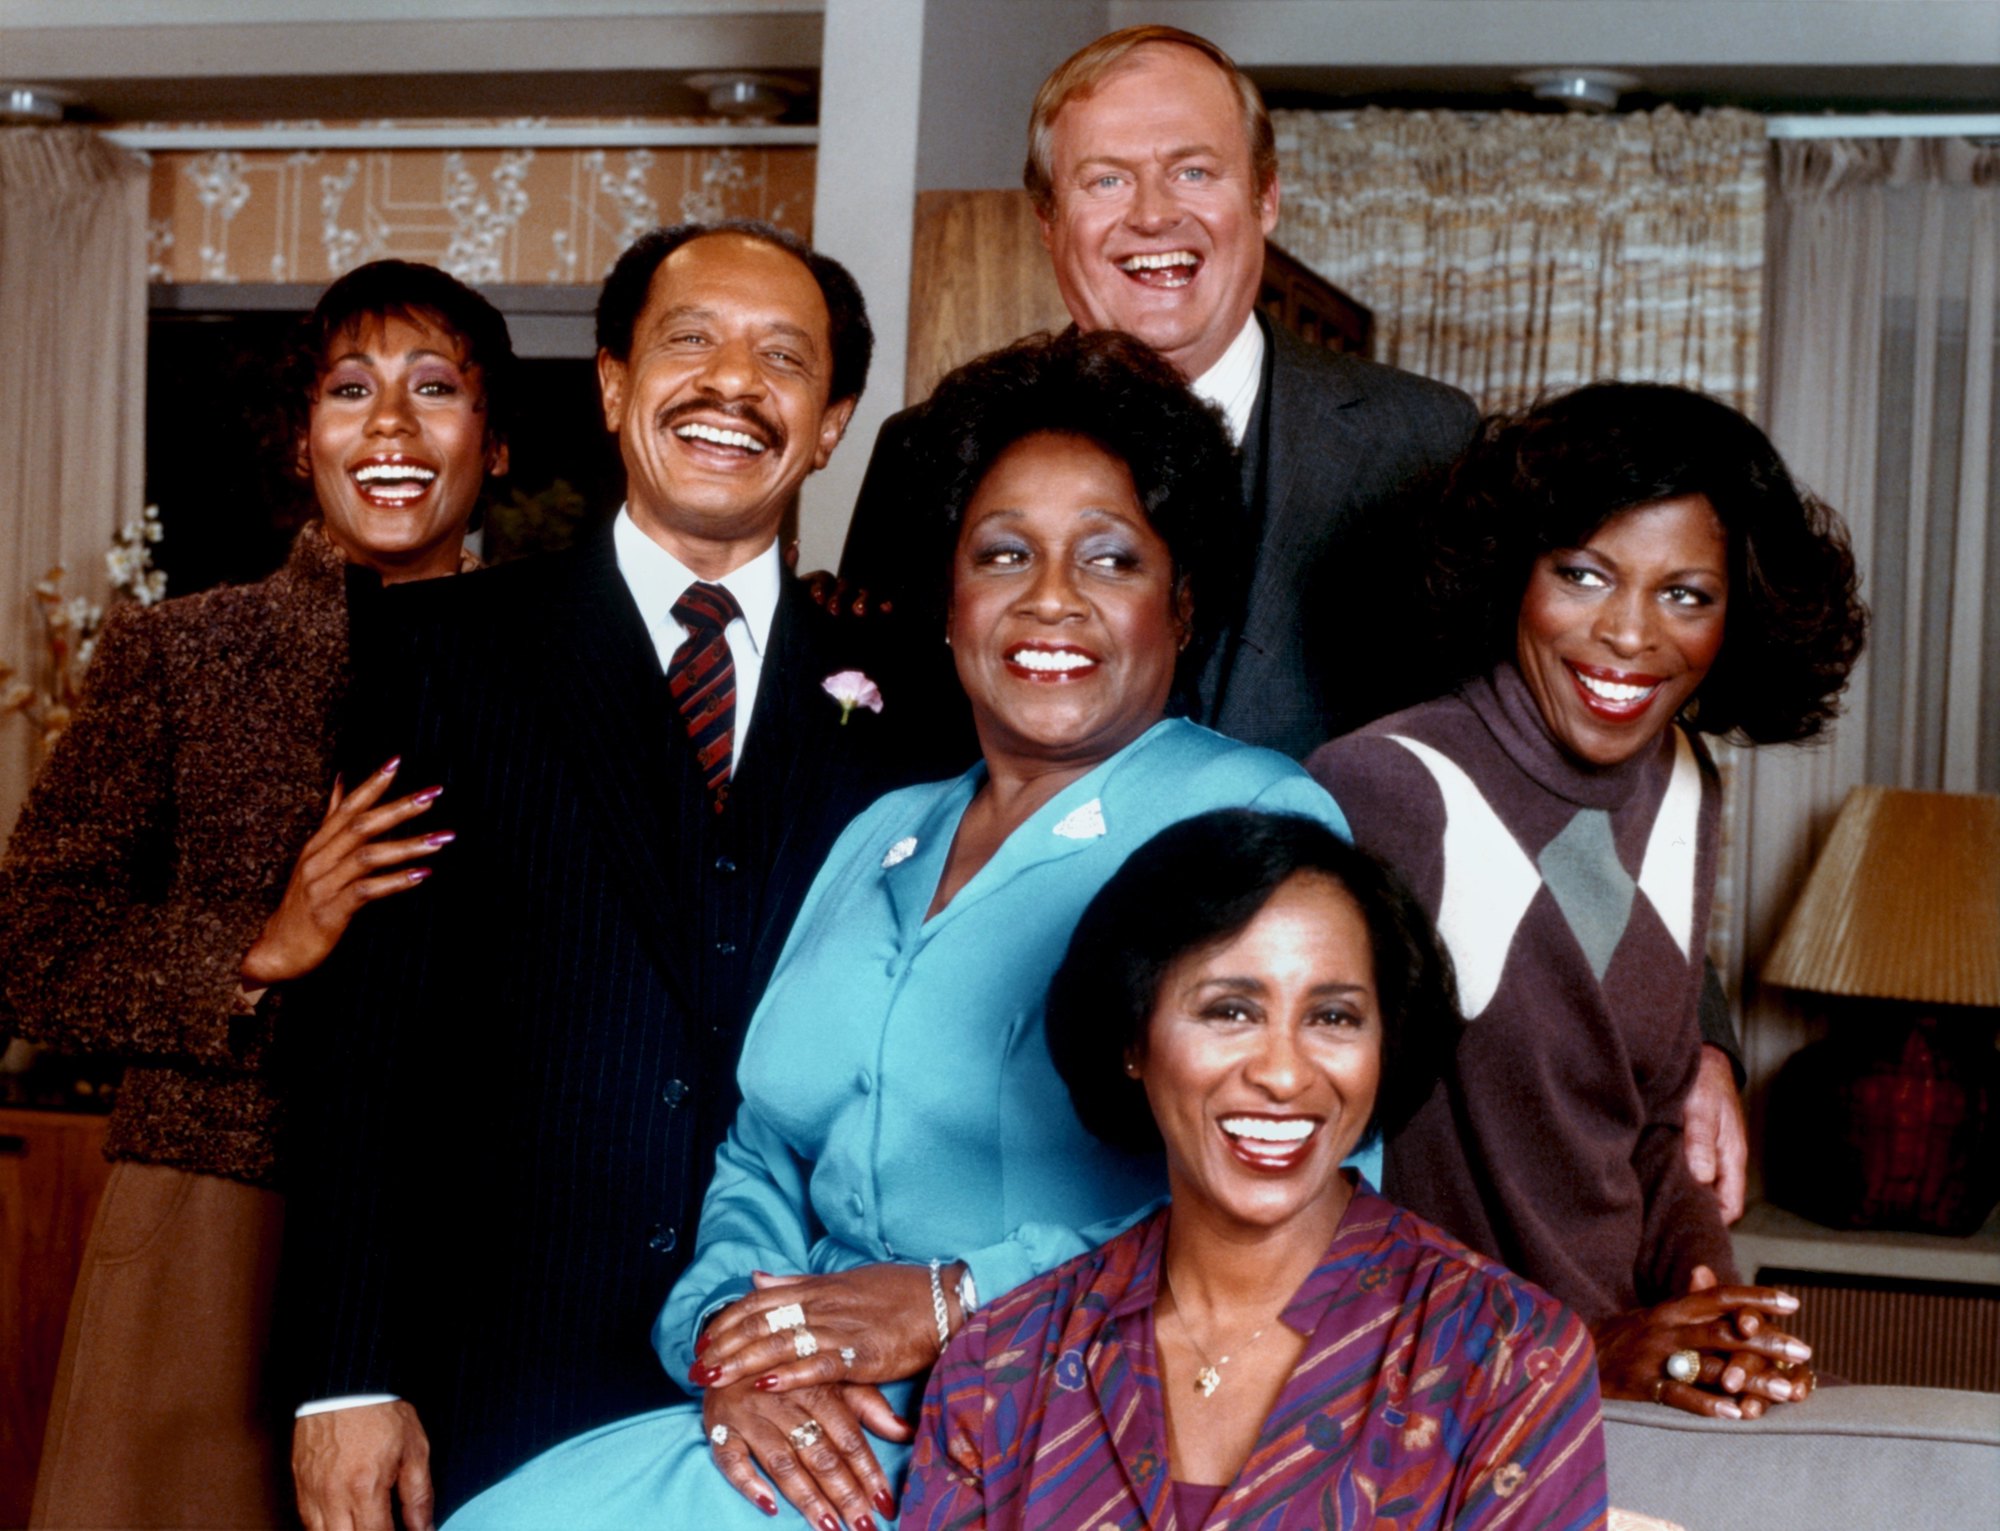 ’70s Sitcom Star Appeared on ‘The Jeffersons’ Before Joining ‘Goodfellas’